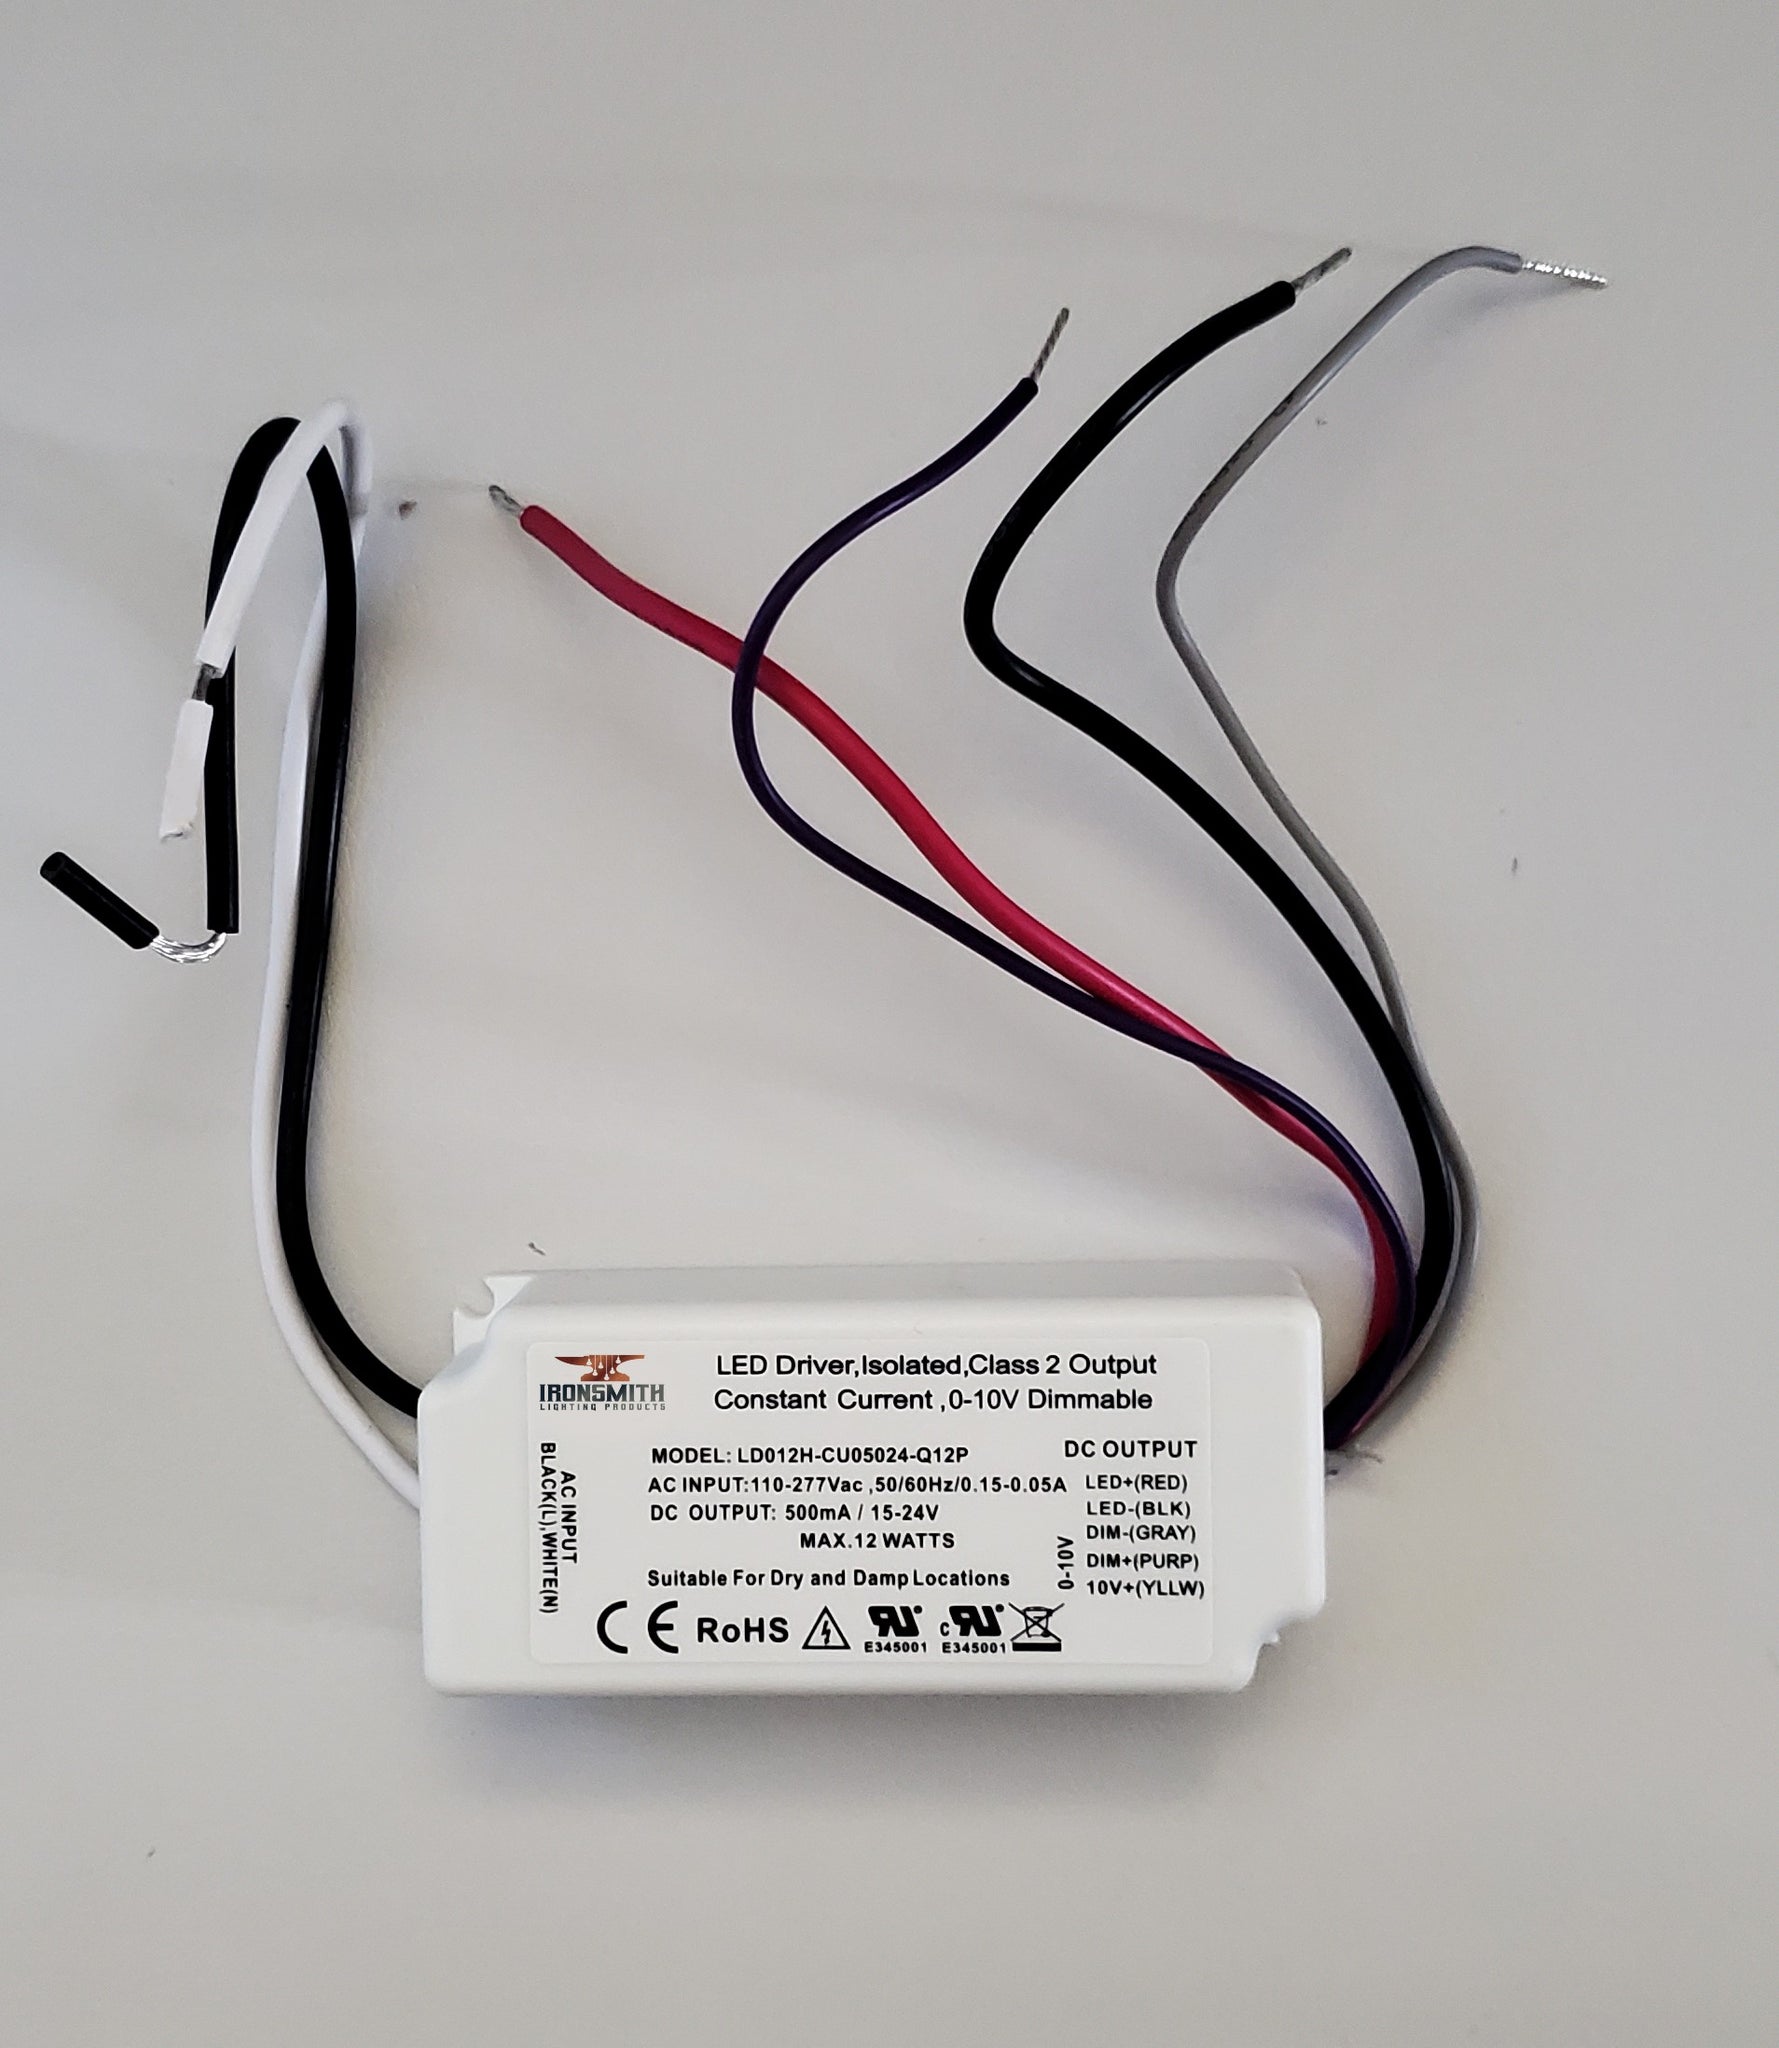 LED Retrofit Power Supplies - 0-10V Dimmable LED Drivers